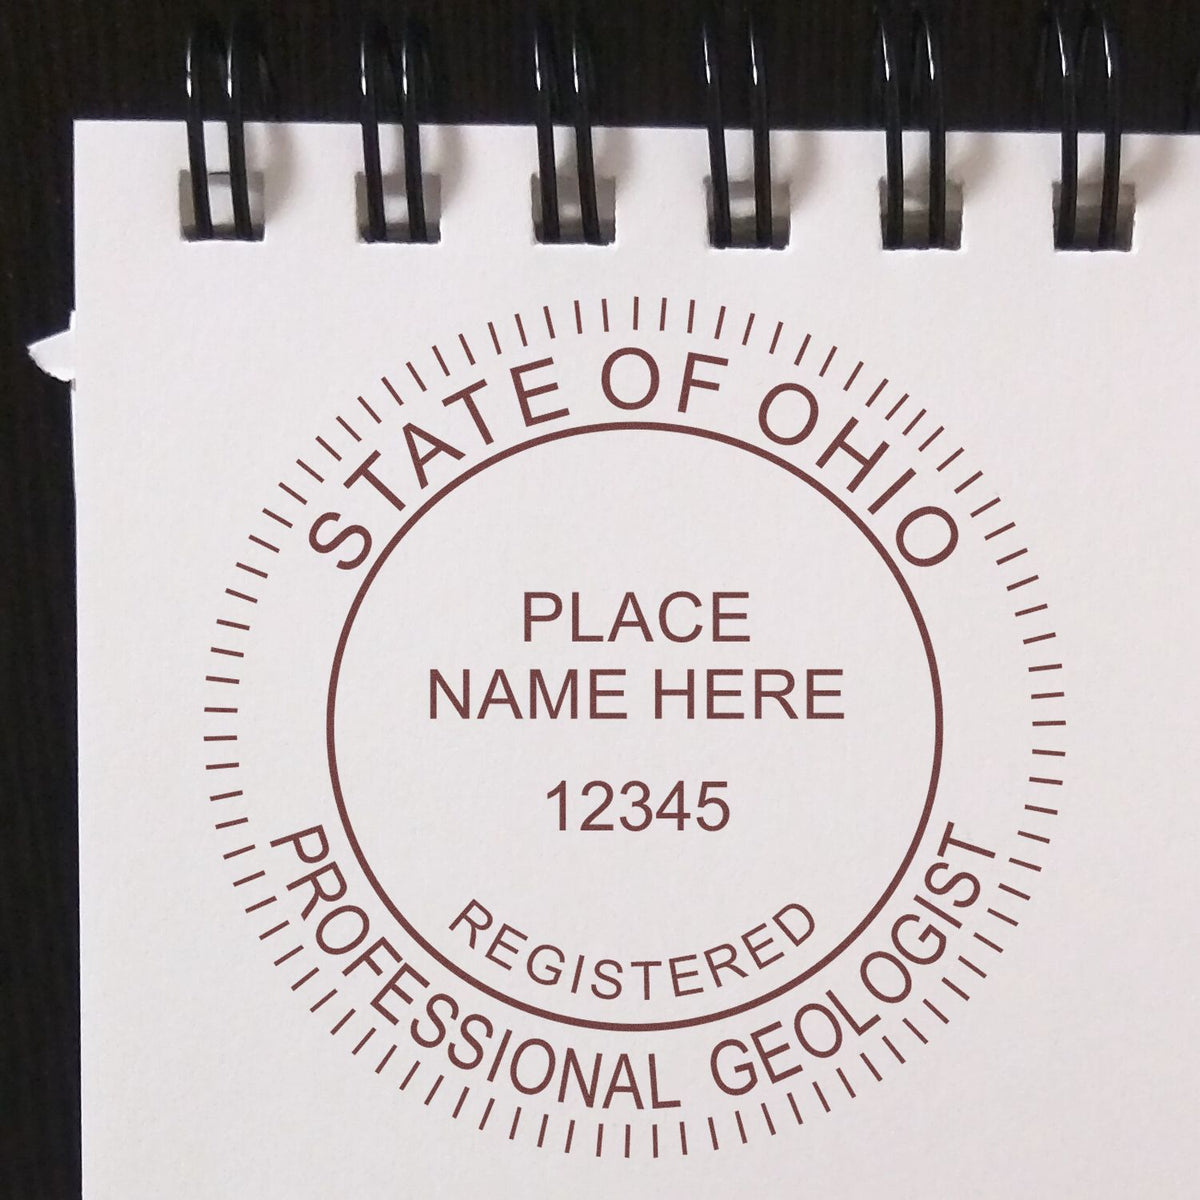 Another Example of a stamped impression of the Slim Pre-Inked Ohio Professional Geologist Seal Stamp on a office form